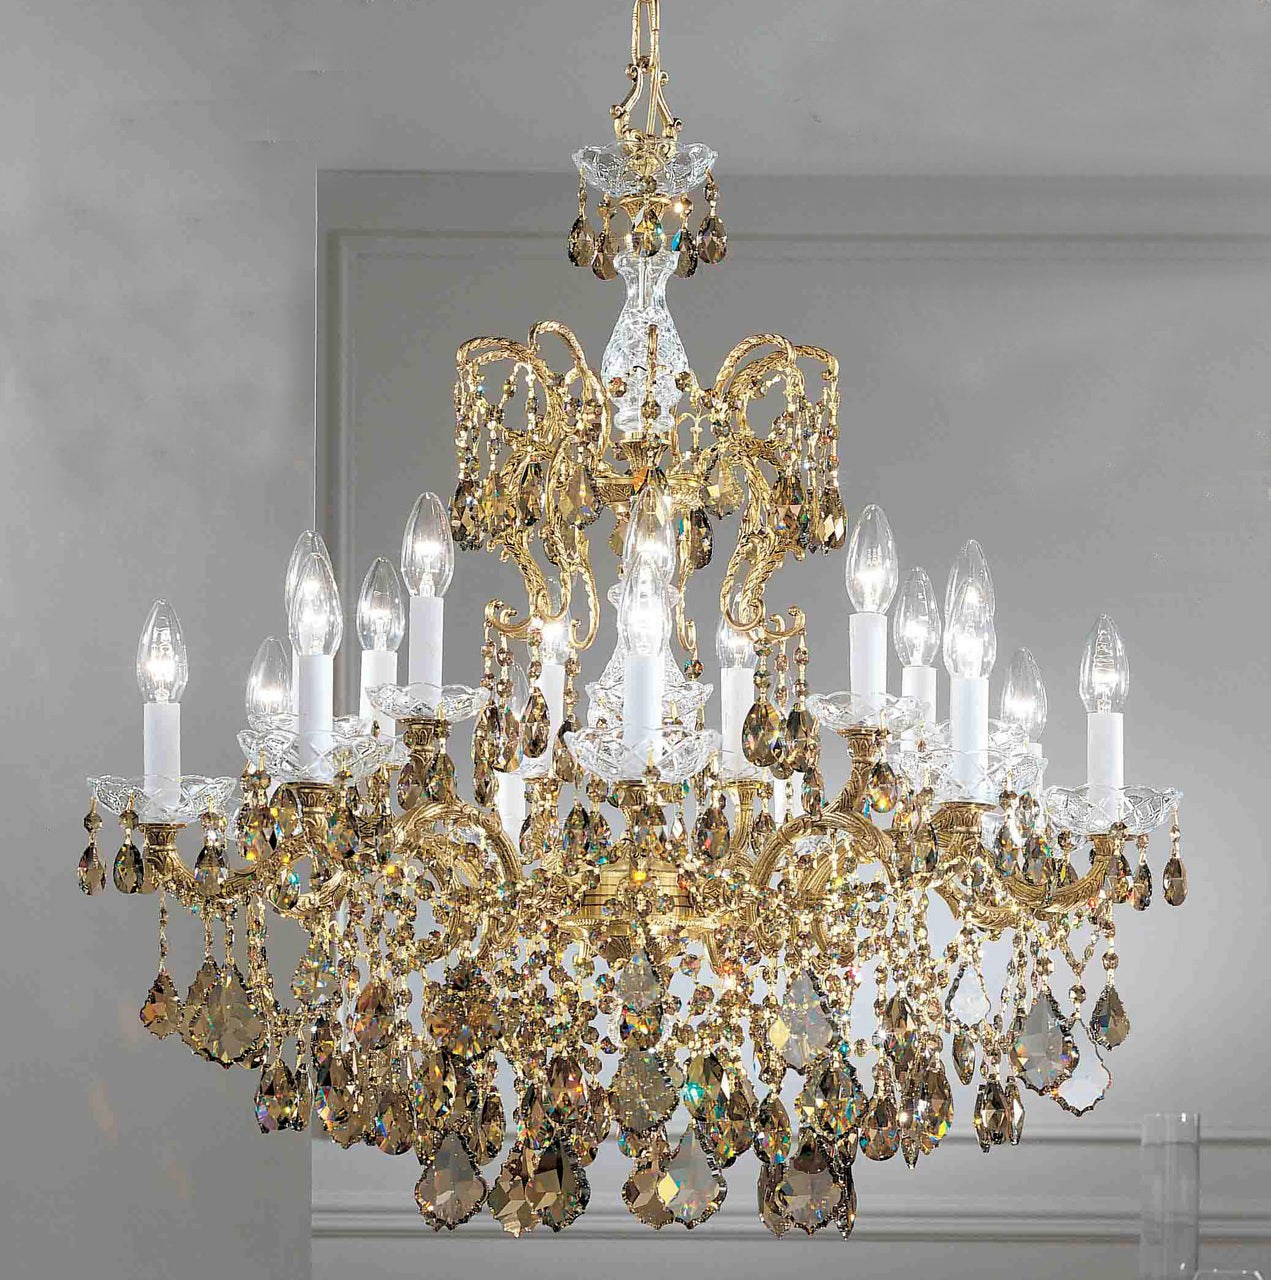 Classic Lighting 5548 OWB SGT Madrid Imperial Crystal/Cast Brass Chandelier in Olde World Bronze (Imported from Spain)